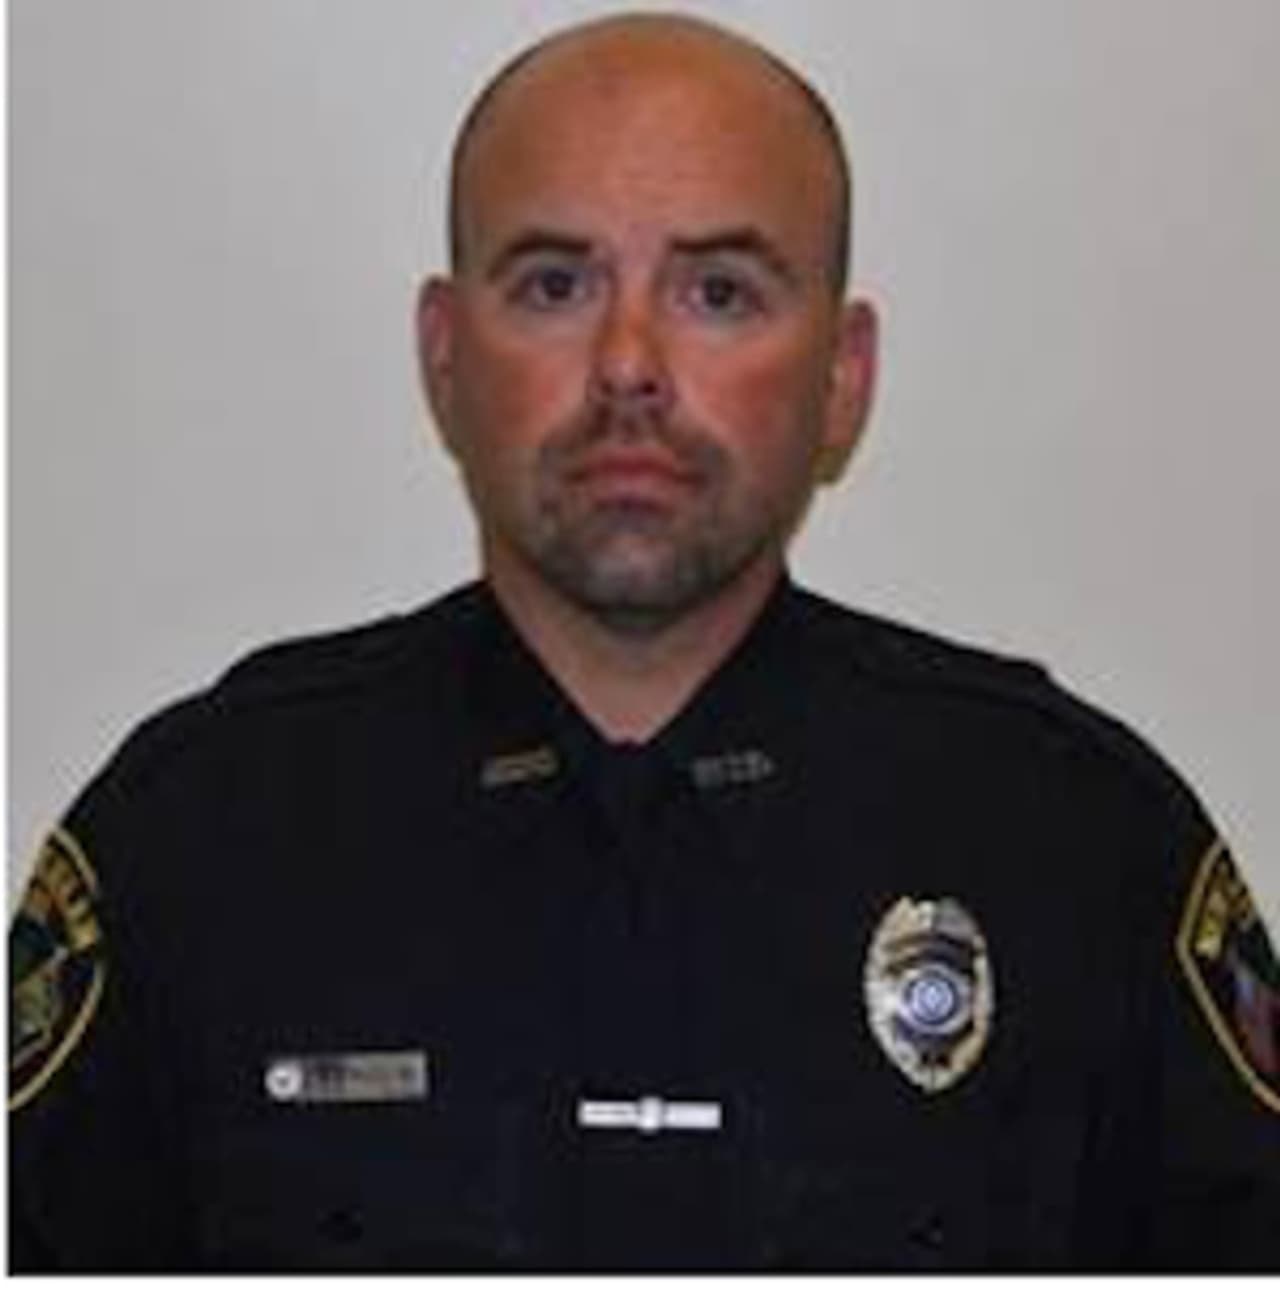 Officer Ron Bentley has been named as the New Canaan Police Department's Community Impact Officer.